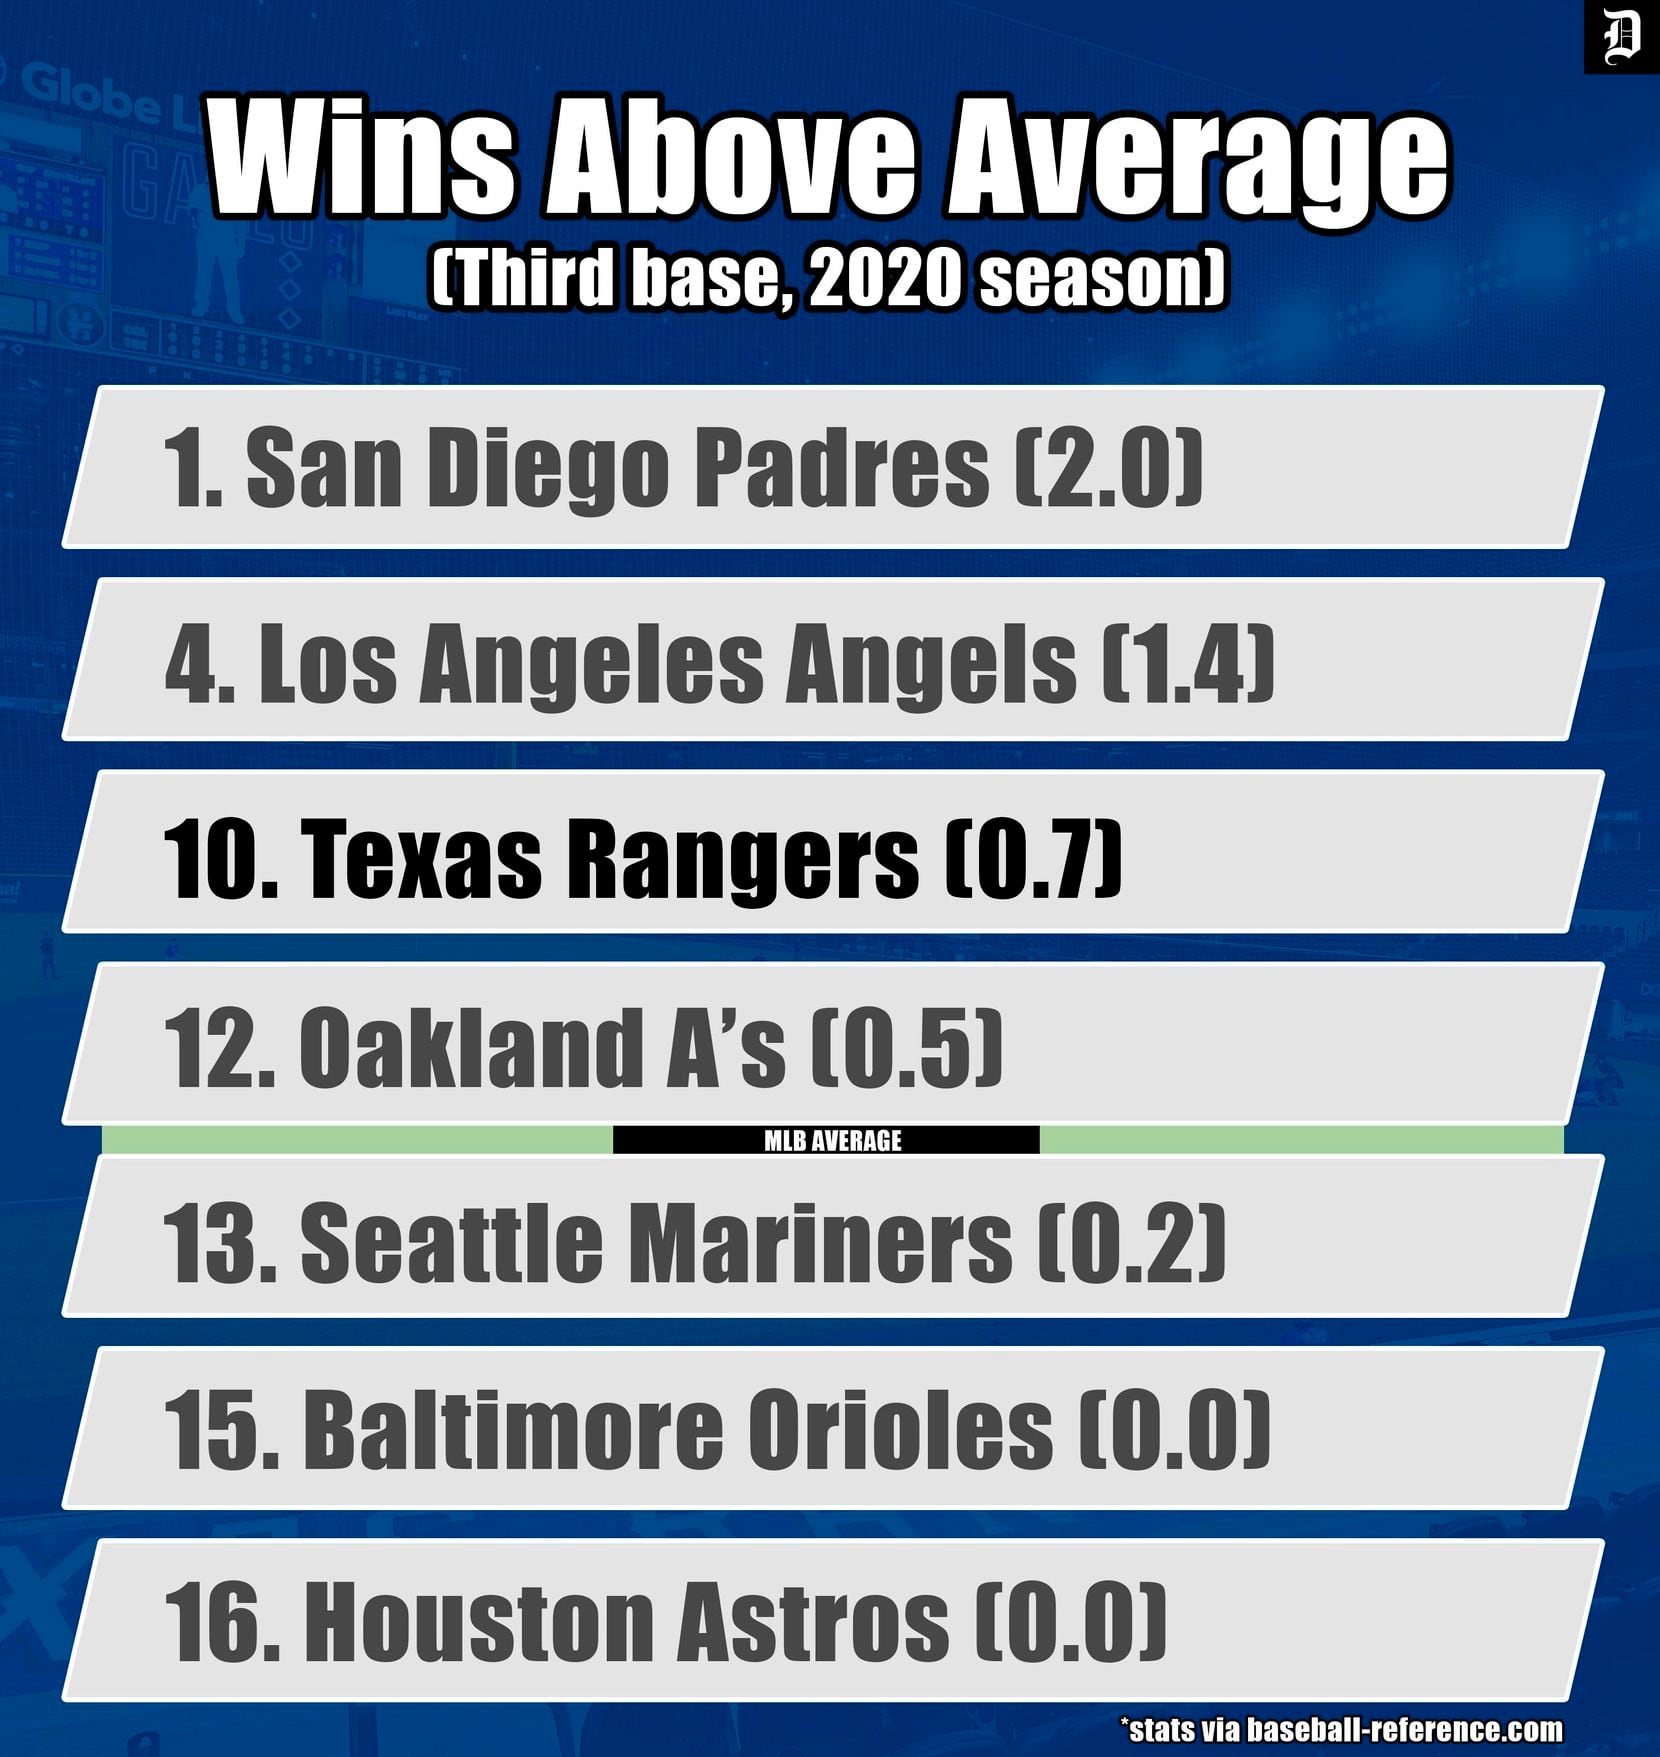 MLB Wins Above Average for the 2020 season.